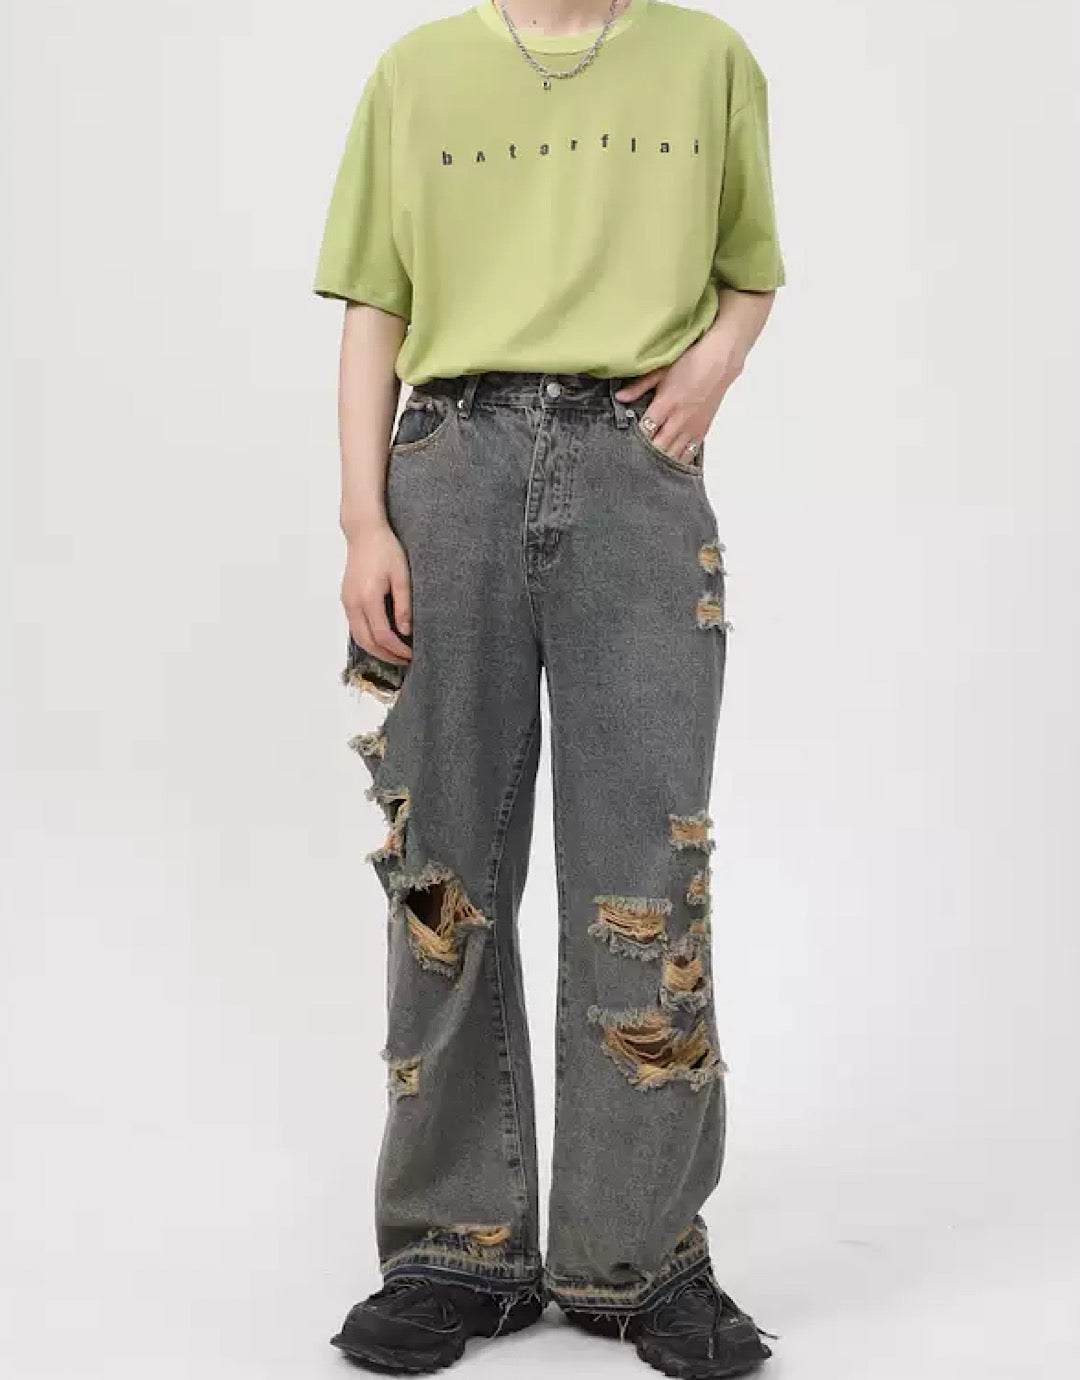 [PLAN1ONE] Dirtyvintage high damage jeans PL0003